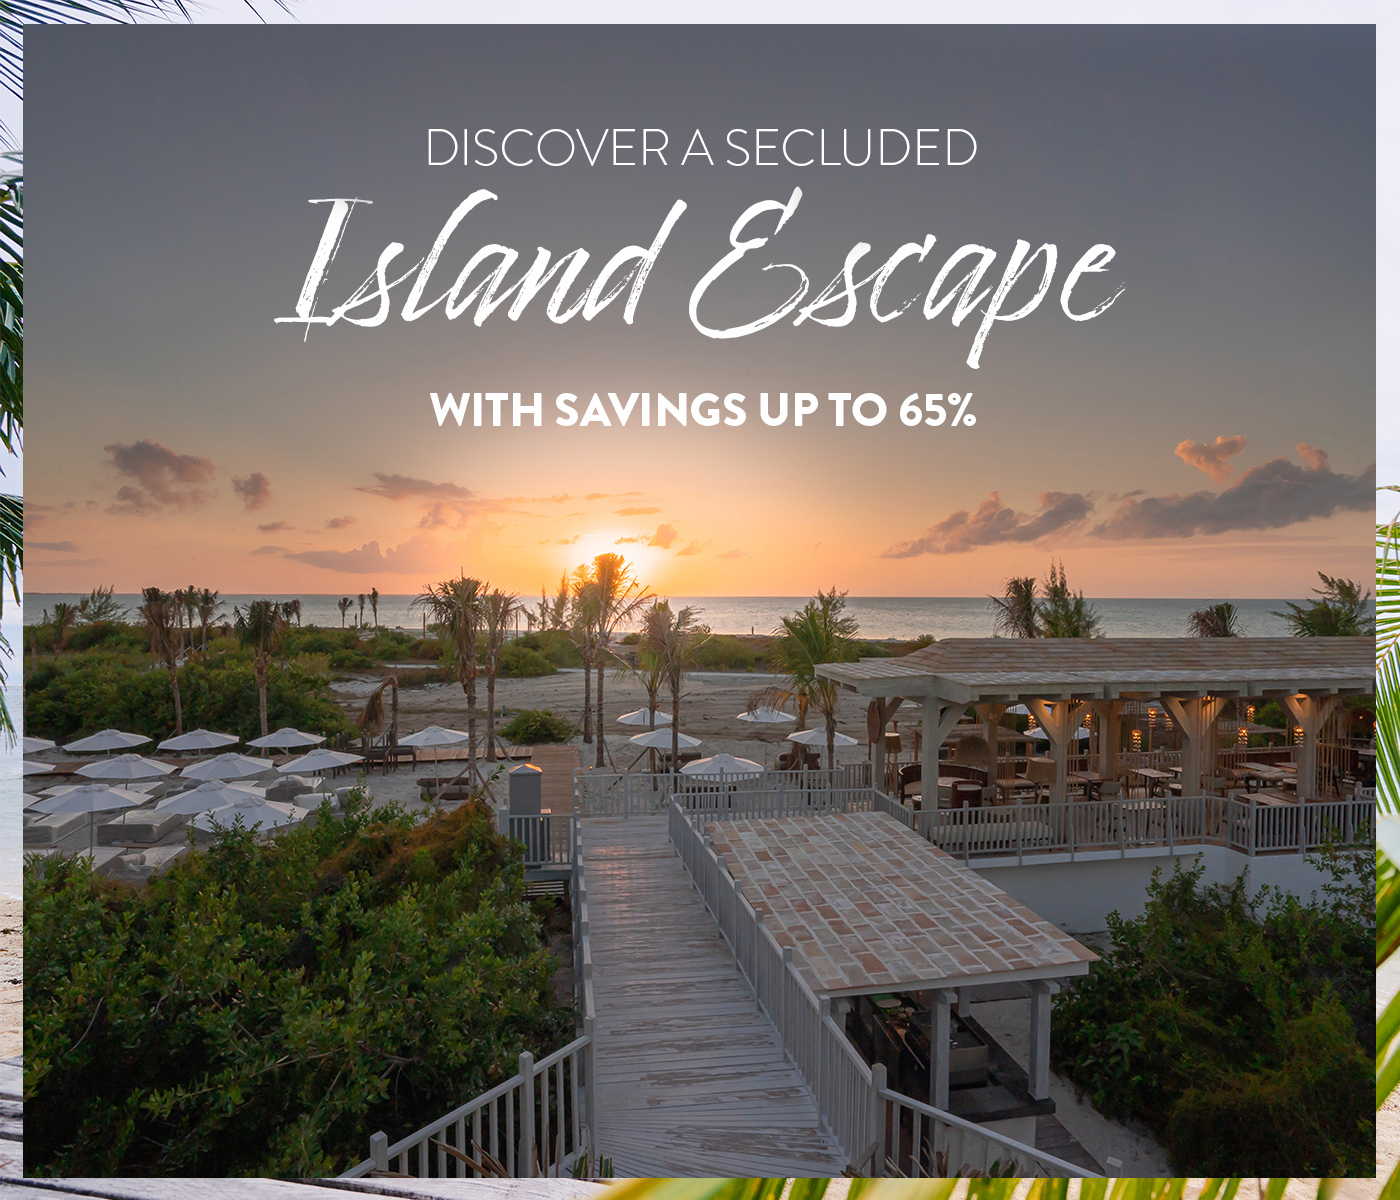 DISCOVER A SECLUDED ISLAND ESCAPE